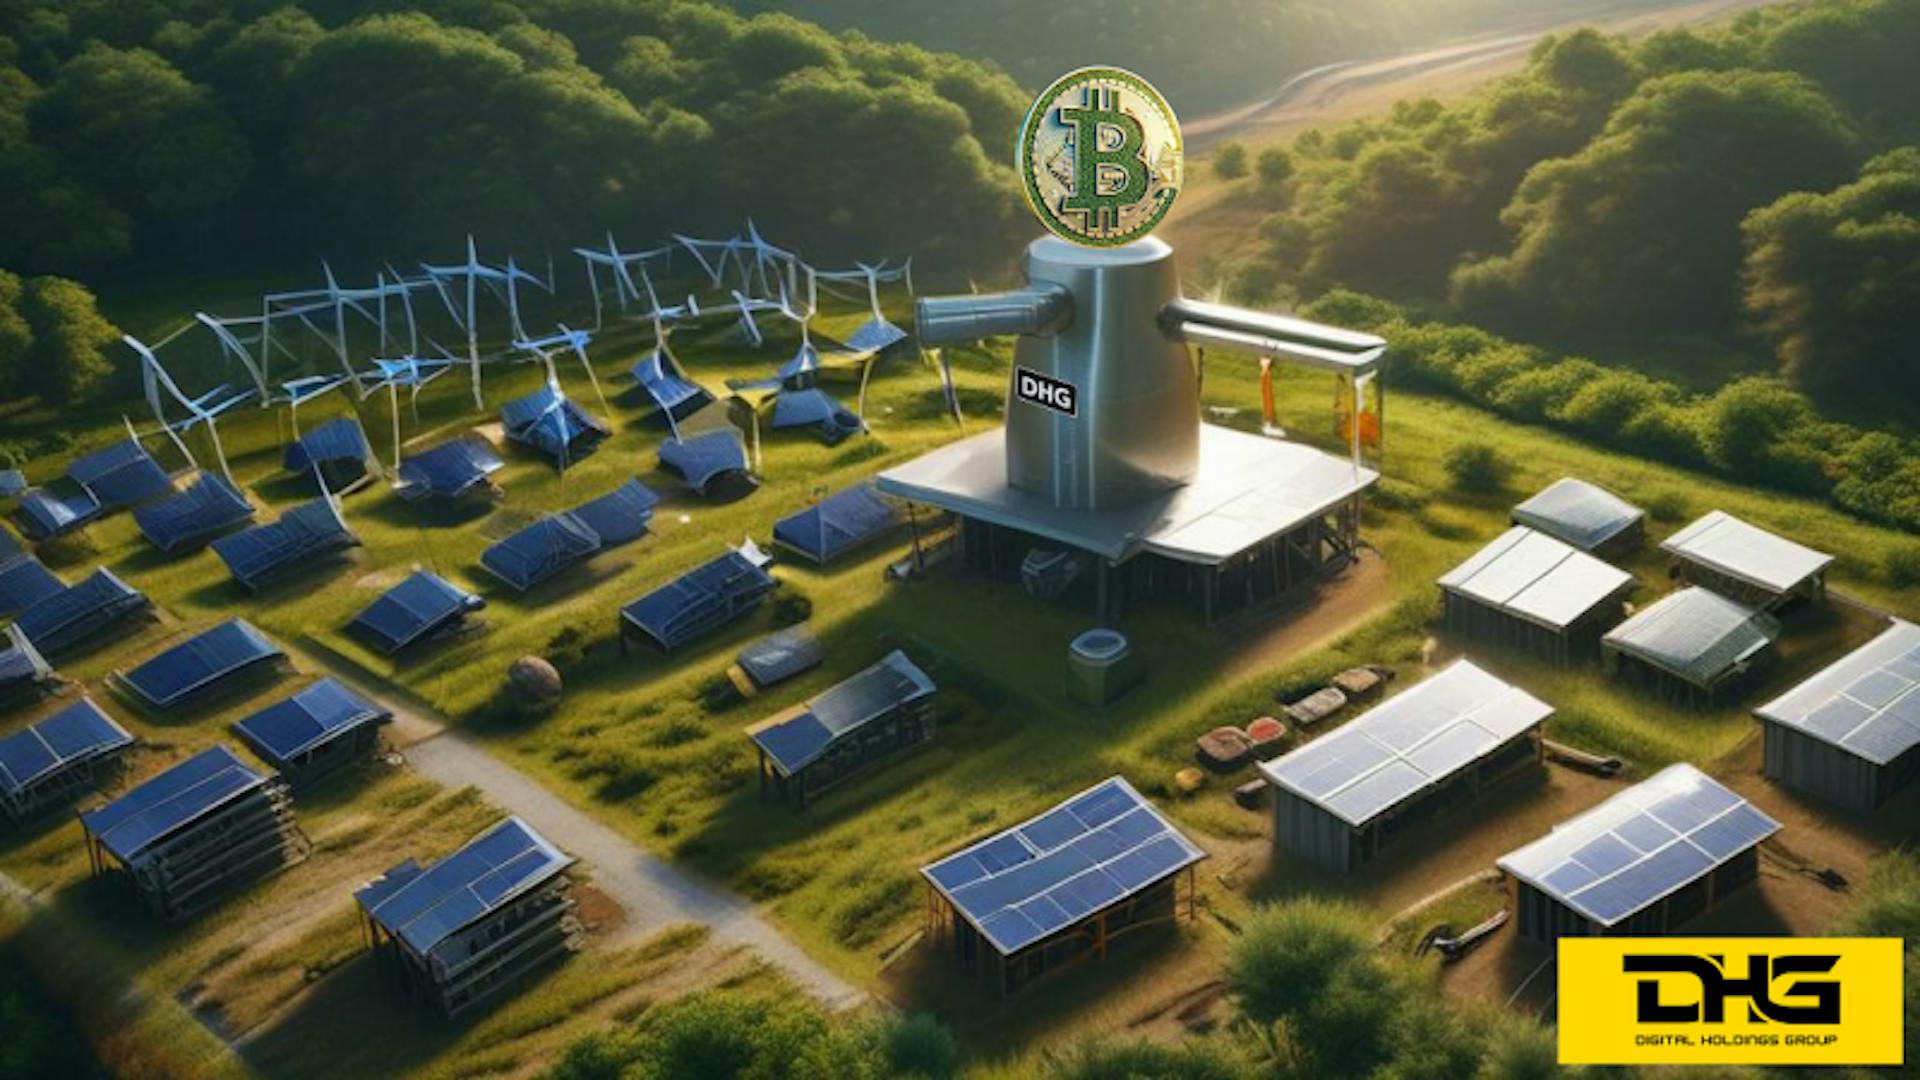 featured image - Digital Holdings Group Champions Renewable Energy In Bitcoin Mining Sector